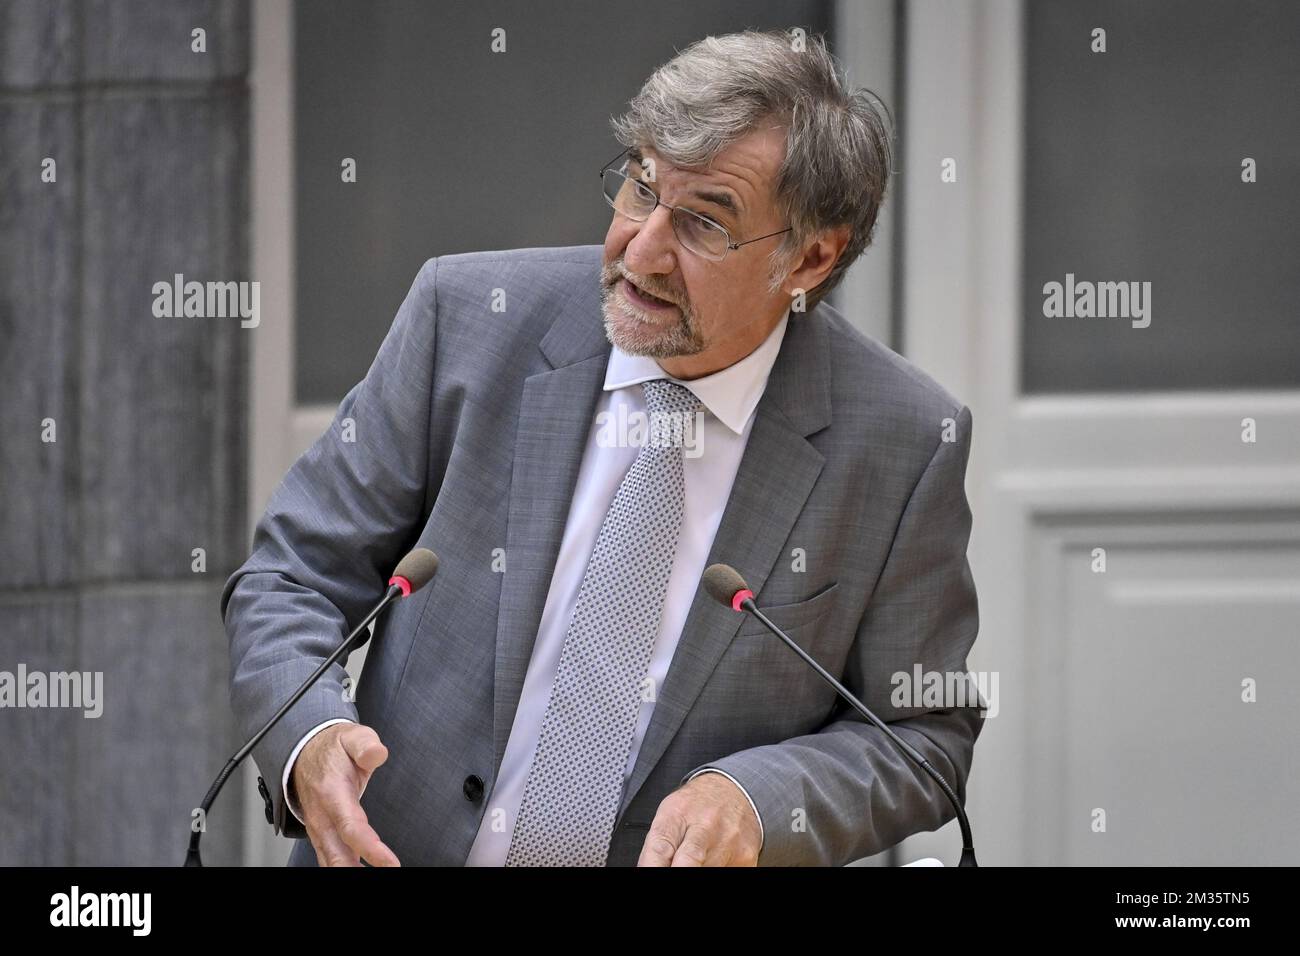 N-VA's group chairman Wilfried Vandaele pictured during a plenary session of the Flemish Parliament to discuss the 'Septemberverklaring', government declaration, of the Flemish Minister-President, Wednesday 29 September 2021, in Brussels. BELGA PHOTO DIRK WAEM Stock Photo